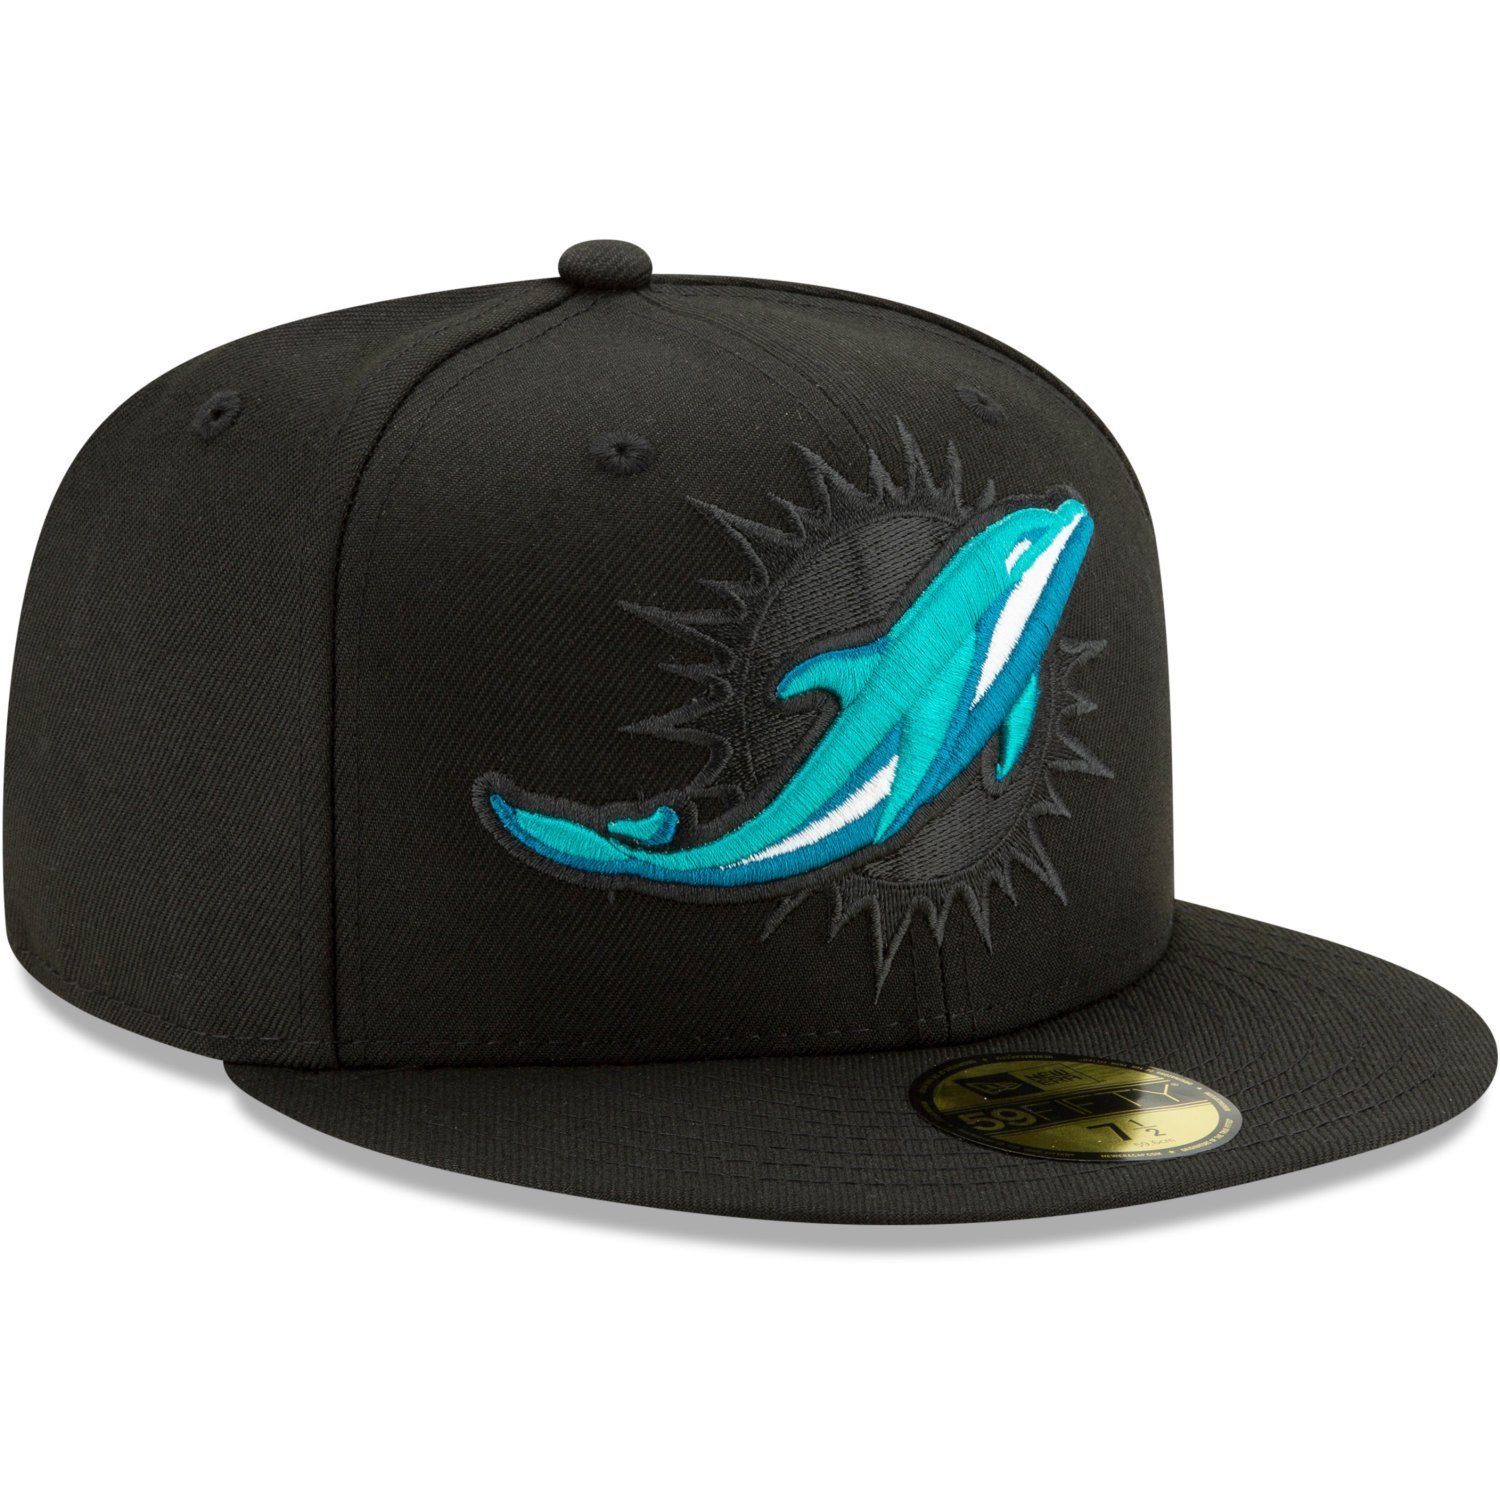 New Era Fitted Cap 59Fifty 2.0 ELEMENTS Miami NFL Dolphins